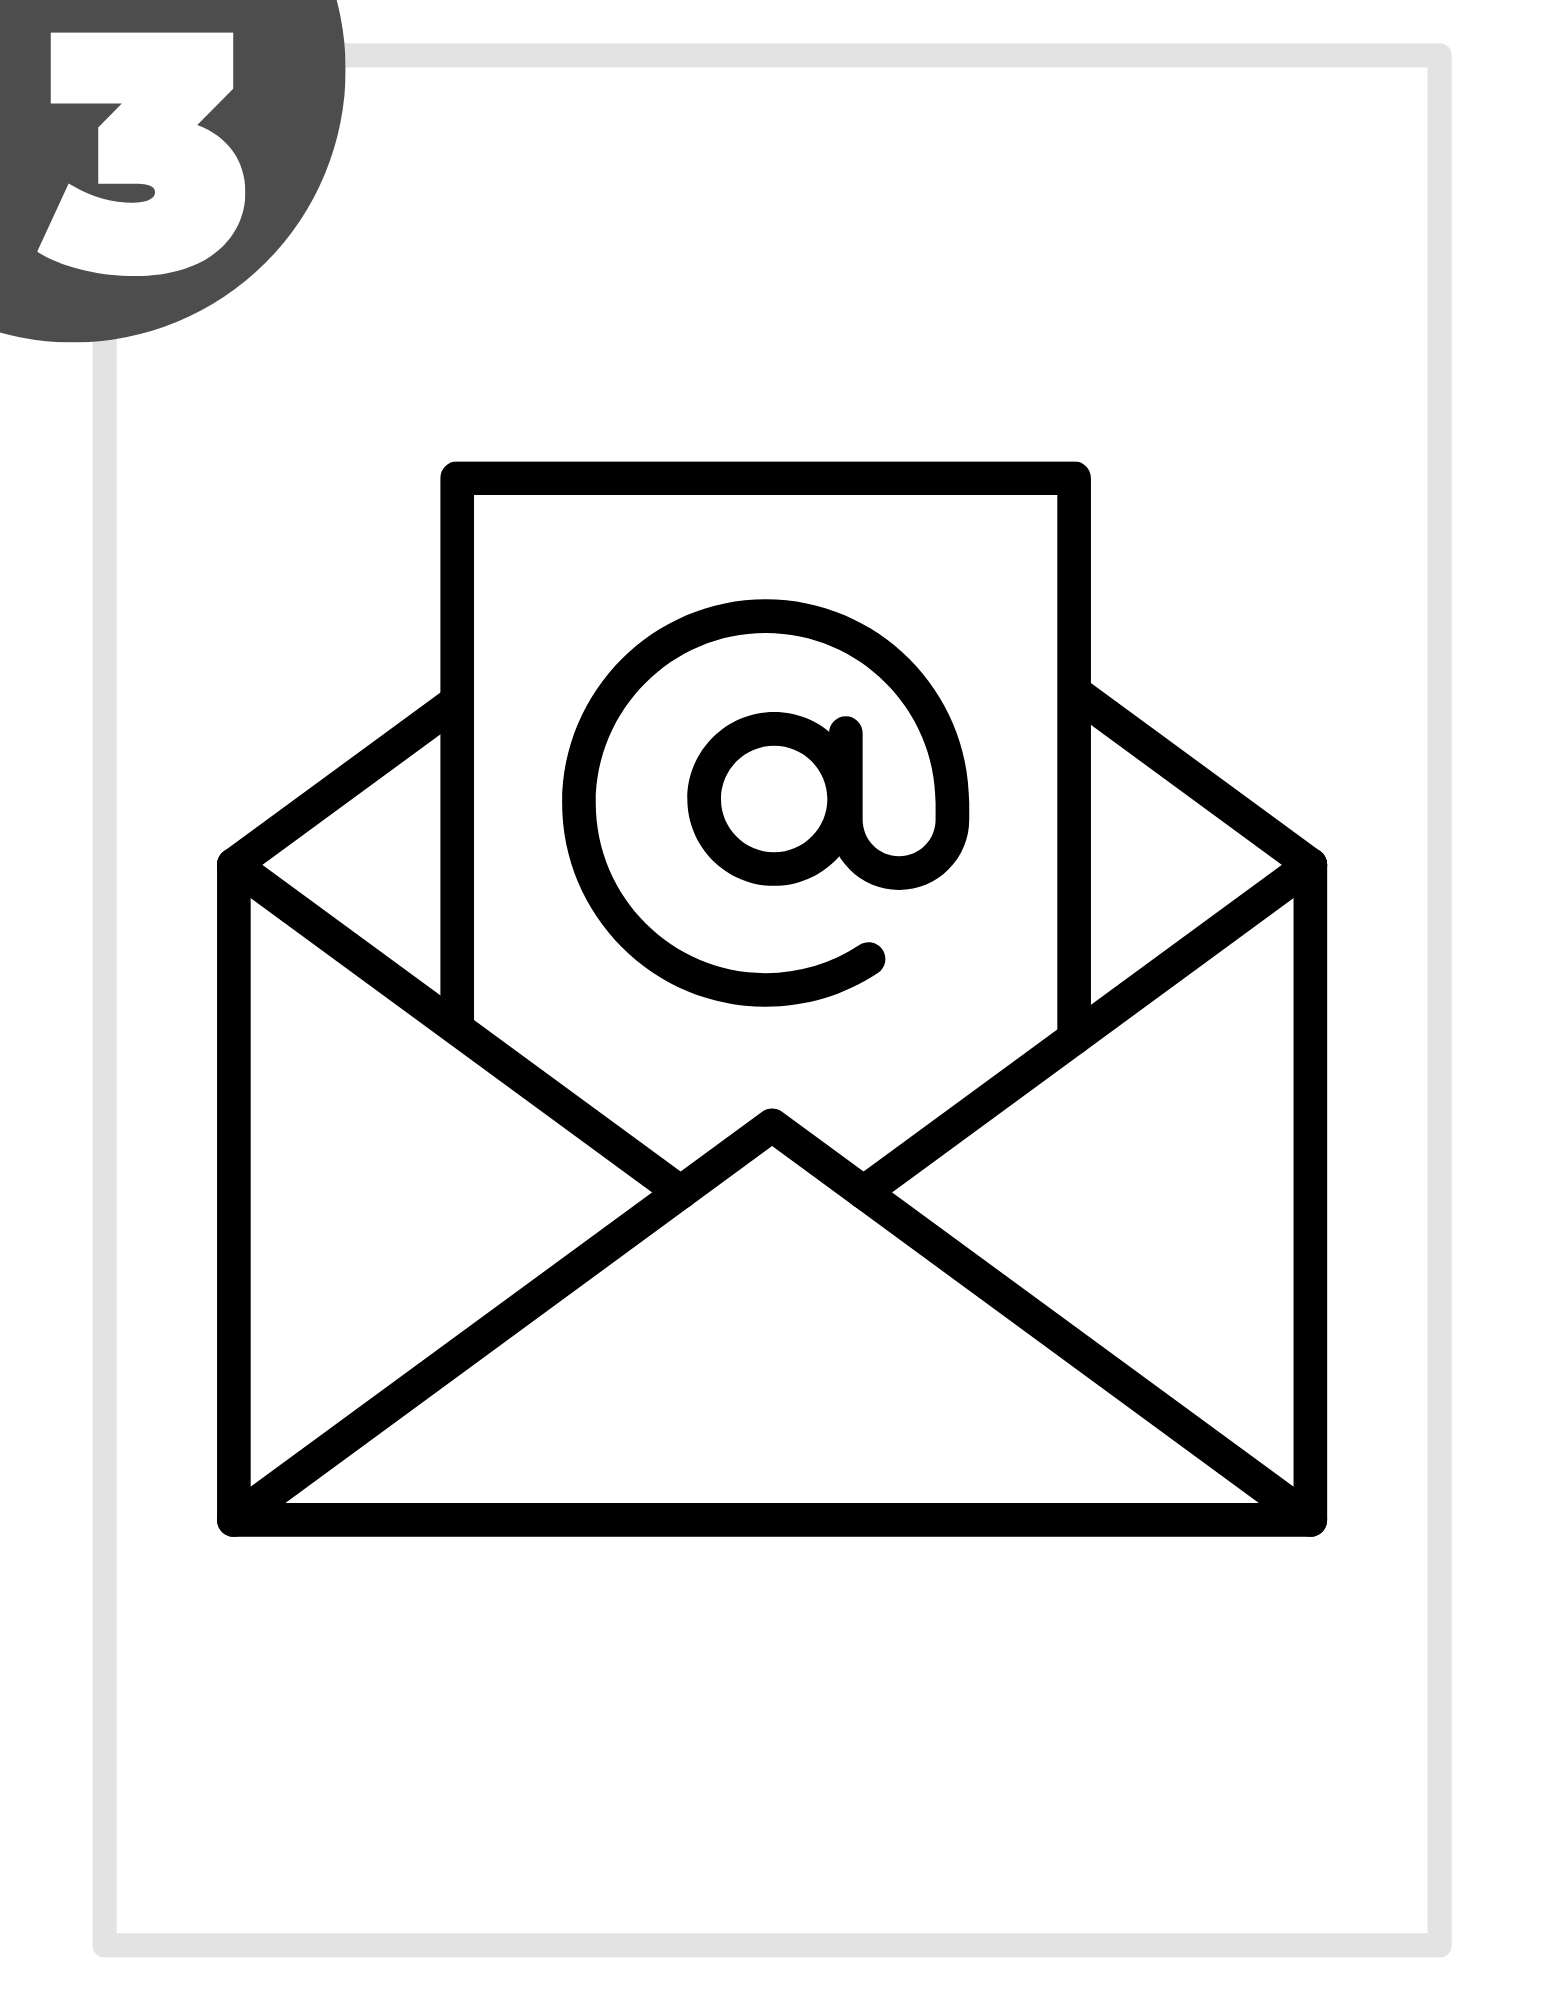 A black and white icon of an envelope with an at sign on it.